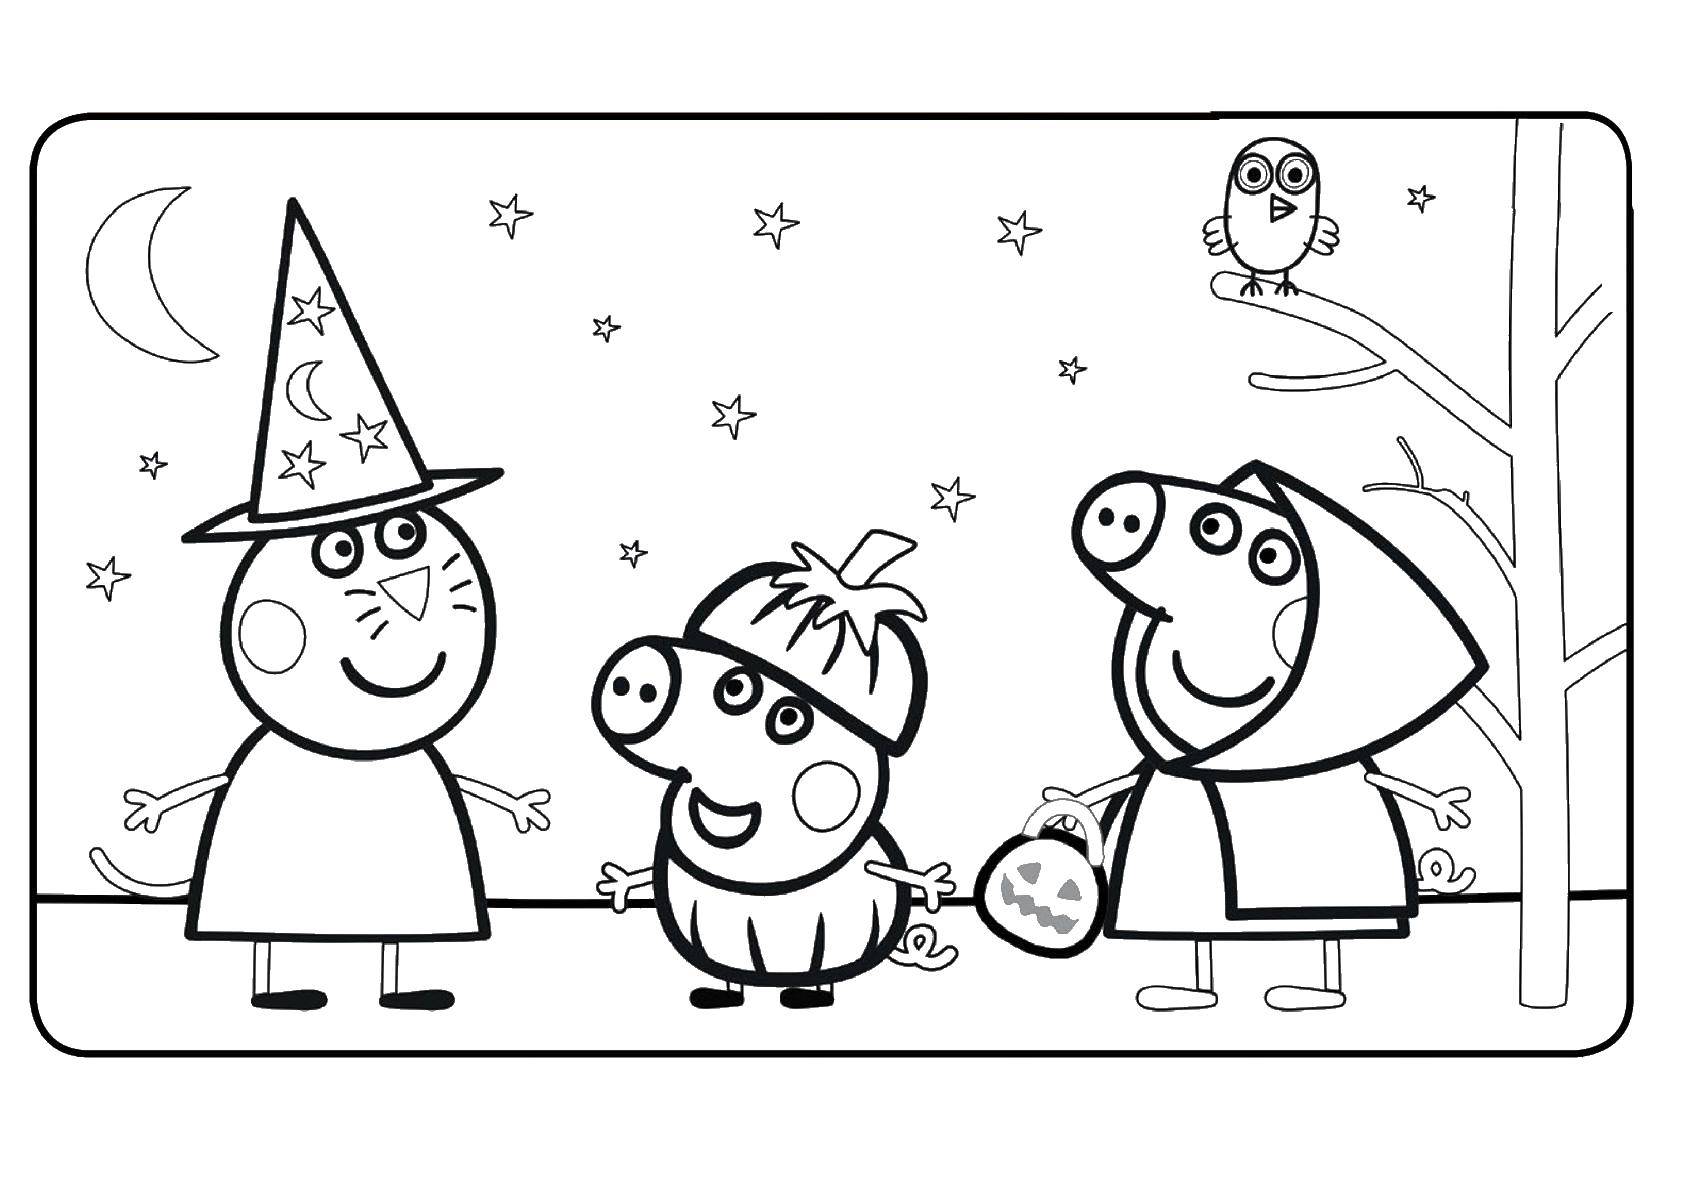 Coloring Peppa pig Halloween and. Category seals. Tags:  Peppa pig, Halloween.